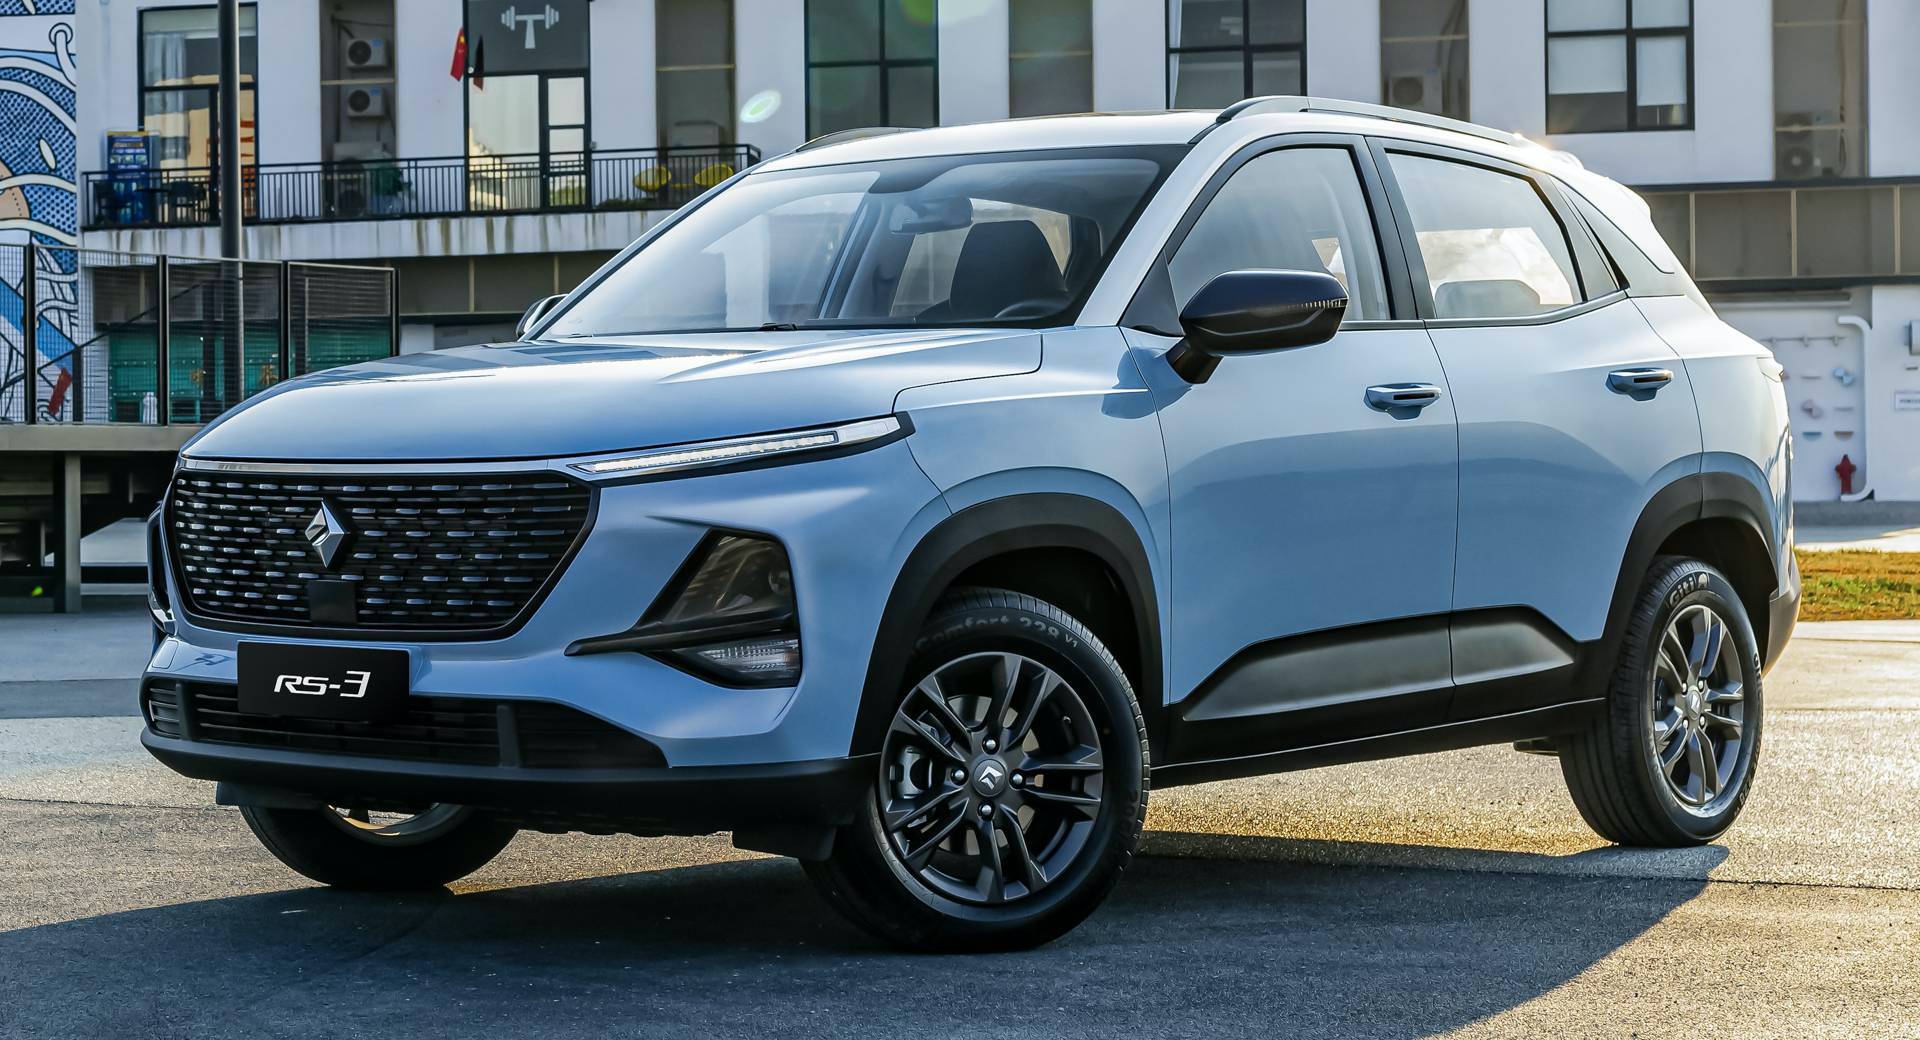  GM  s Baojun RS 3 Is A Small SUV For China That Costs Just 